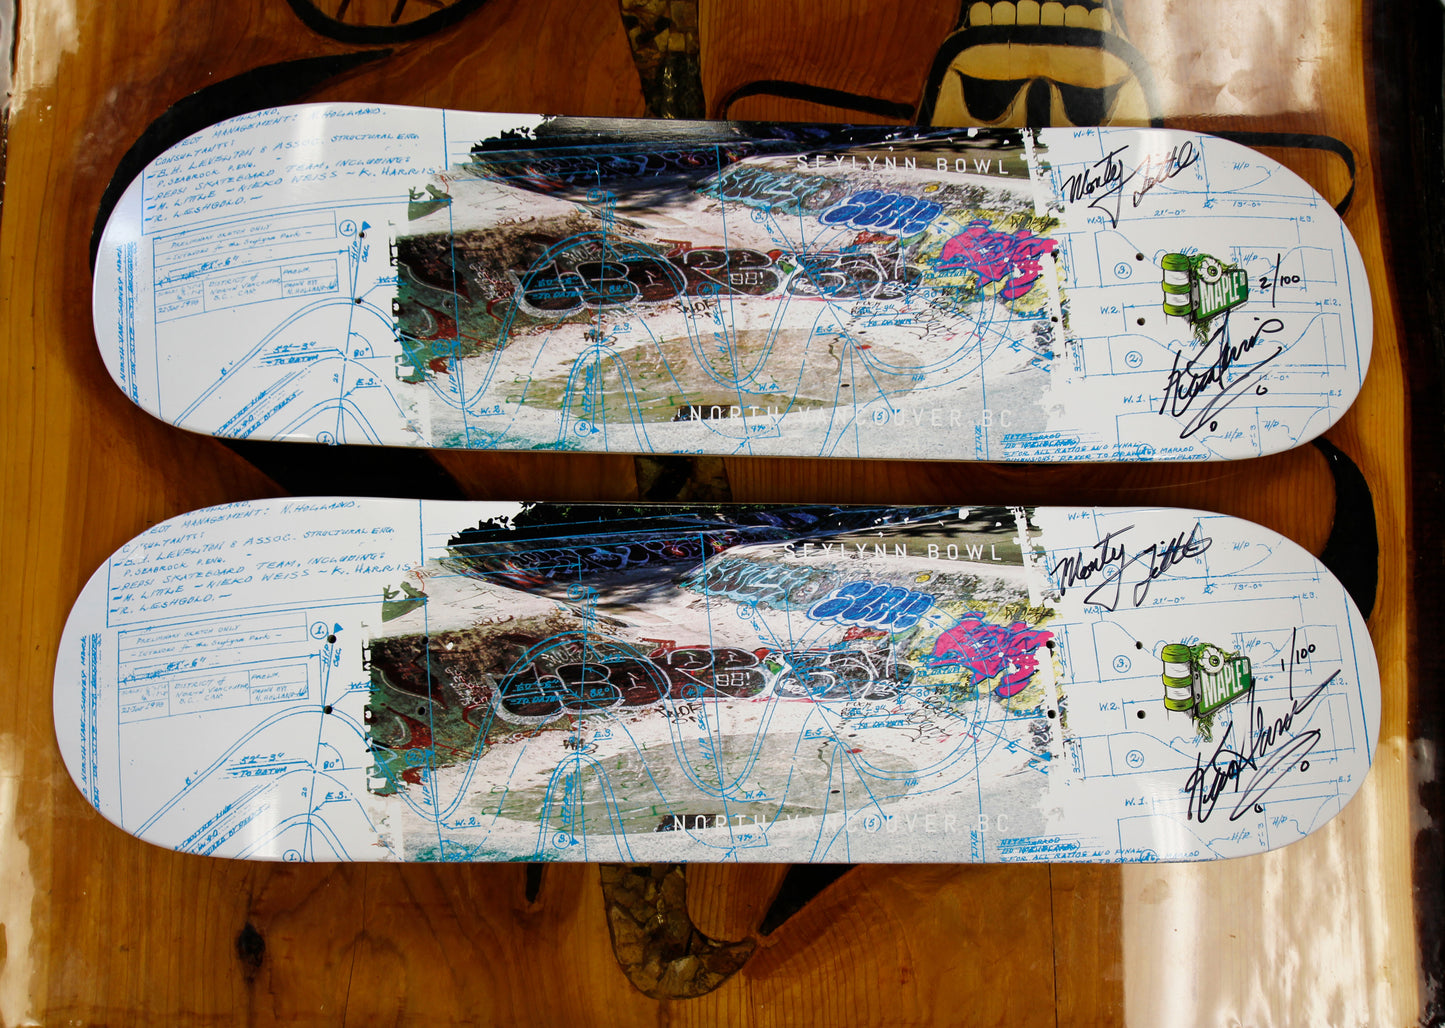 MAPLE ROAD PRESENTS THIS SPECIAL LIMITED EDITION SEYLYNN BOWL COLLECTORS DECK